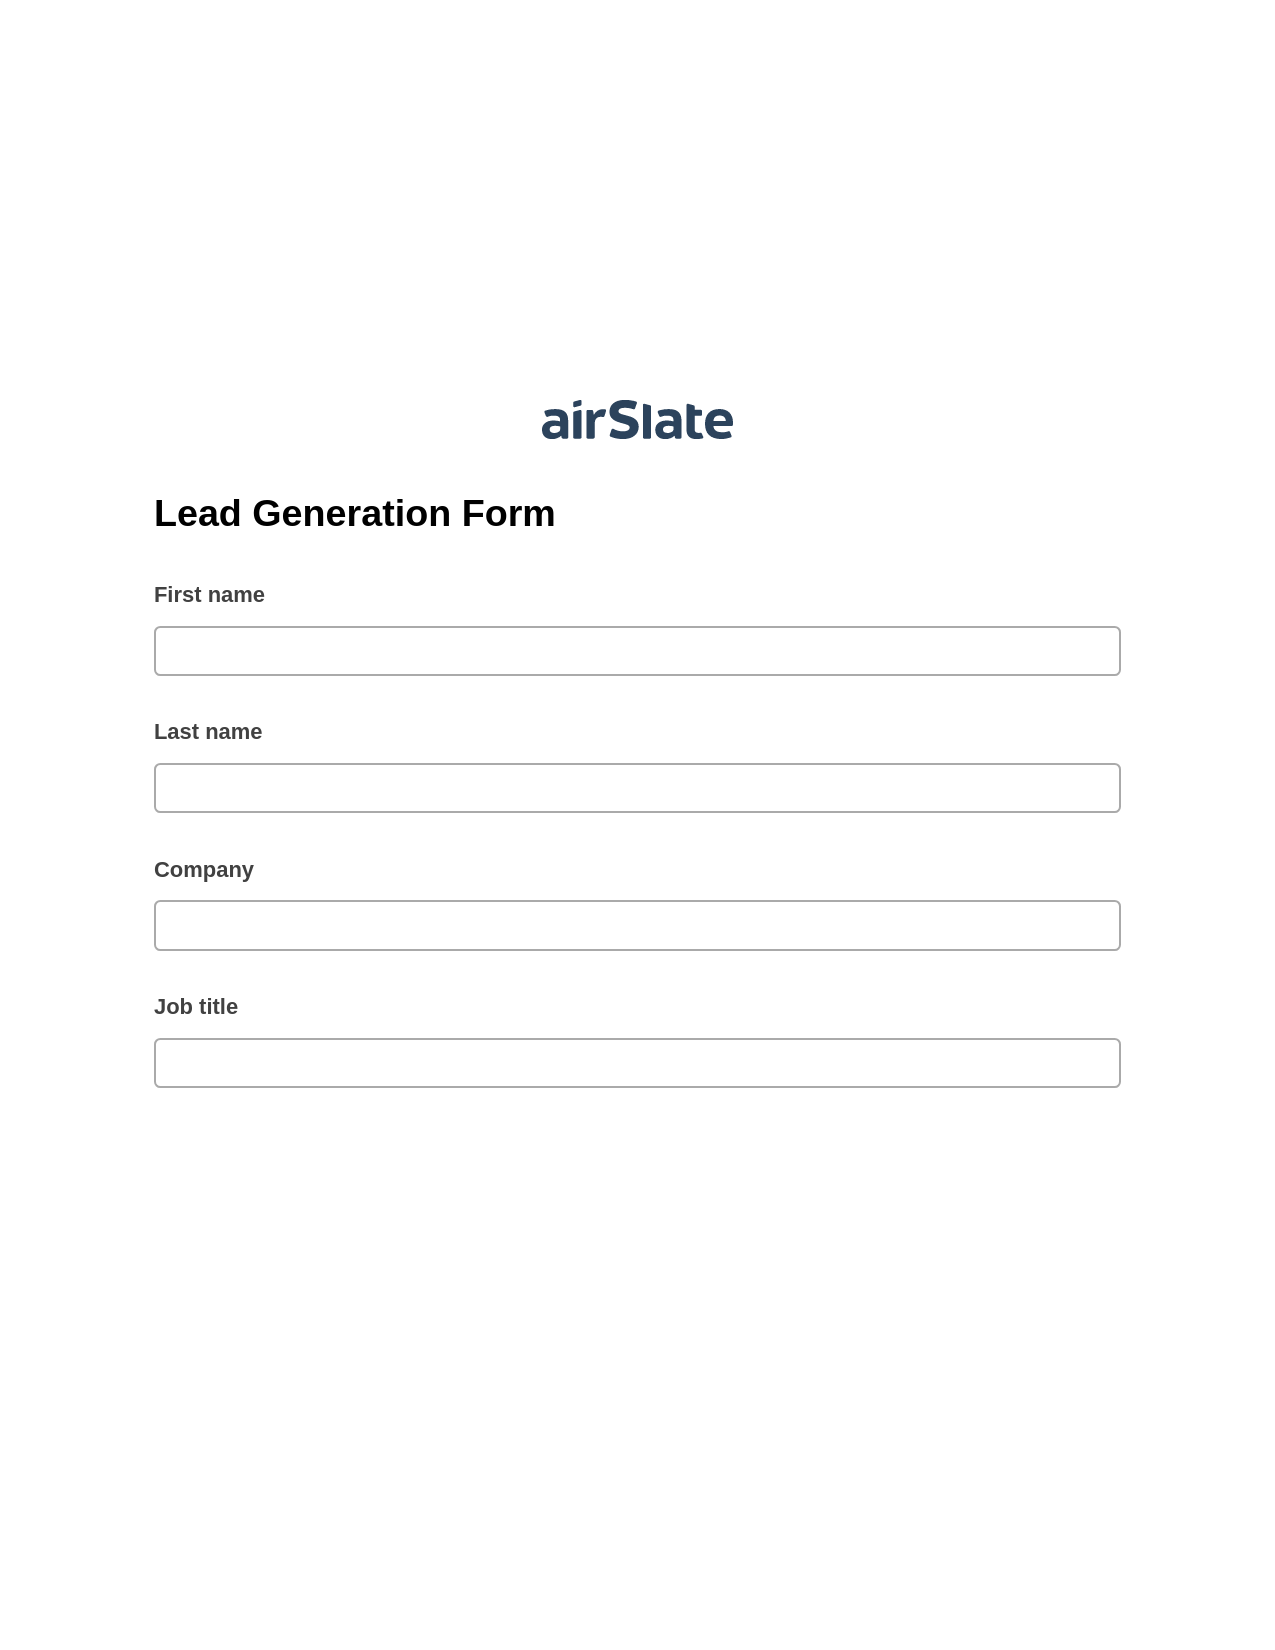 Lead Generation Form Pre-fill from Litmos bot, Remove Tags From Slate Bot, Archive to Box Bot